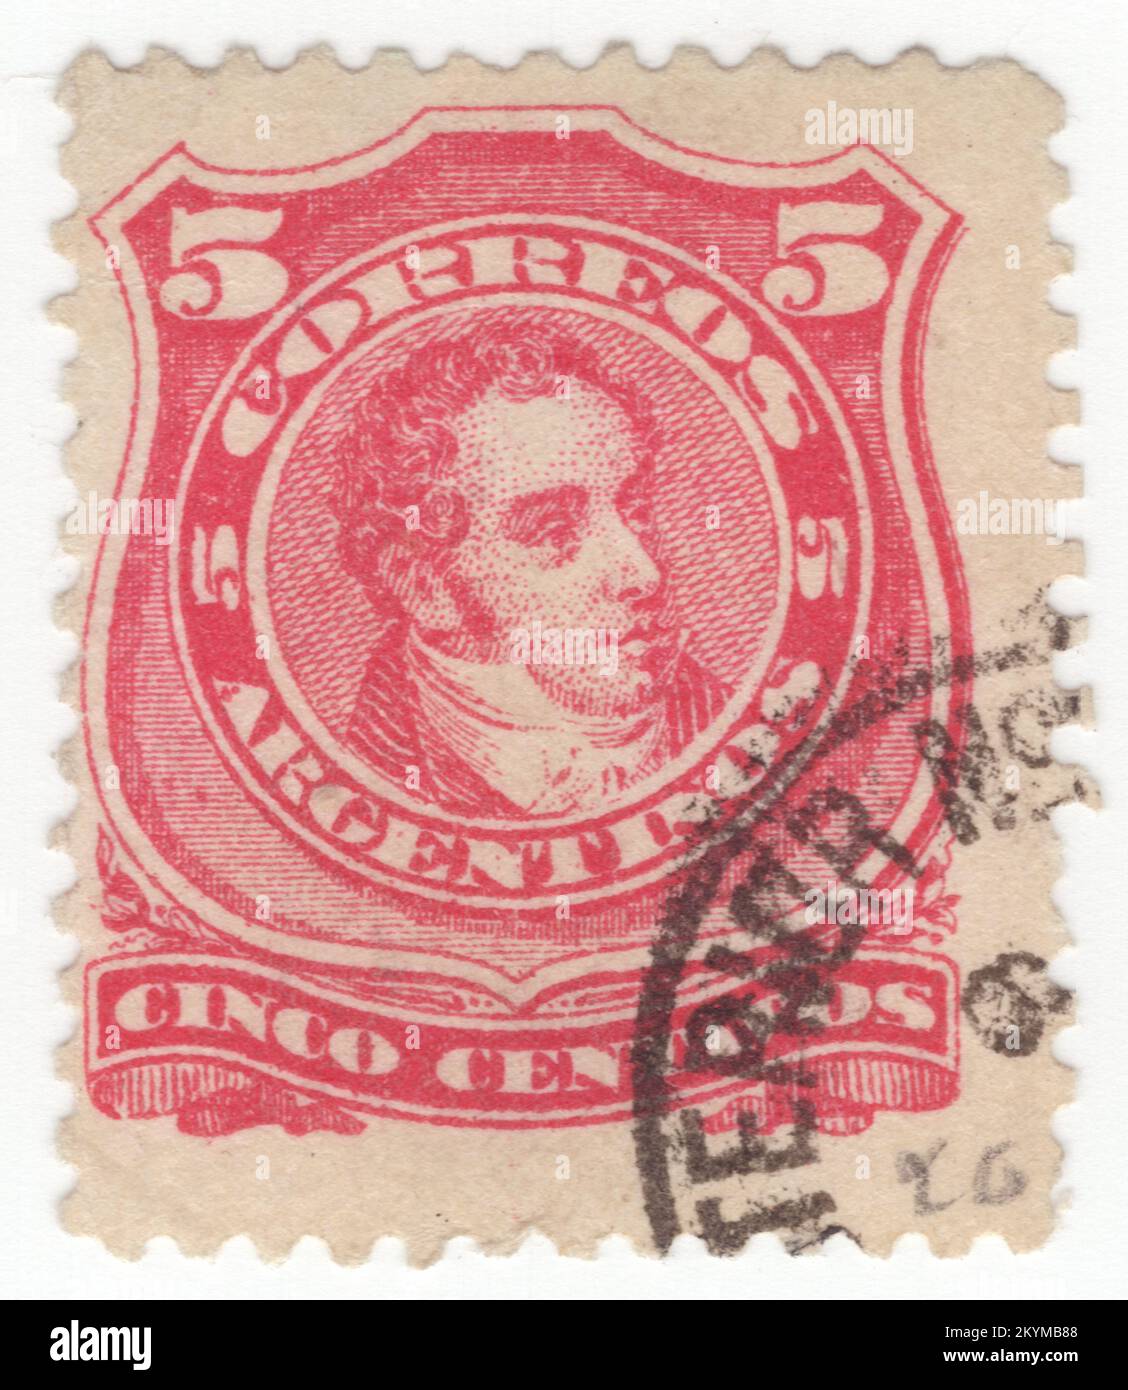 ARGENTINA - 1867: 5 centavos vermilion postage stamp depicting portrait of Bernardino de la Trinidad Gonzalez Rivadavia, first President of Argentina, then called the United Provinces of the Río de la Plata, from February 8, 1826 to June 27, 1827. He was educated at the Royal College of San Carlos, but left without finishing his studies. During the British Invasions he served as Third Lieutenant of the Galicia Volunteers. He participated in the open Cabildo on May 22, 1810 voting for the deposition of the viceroy Stock Photo